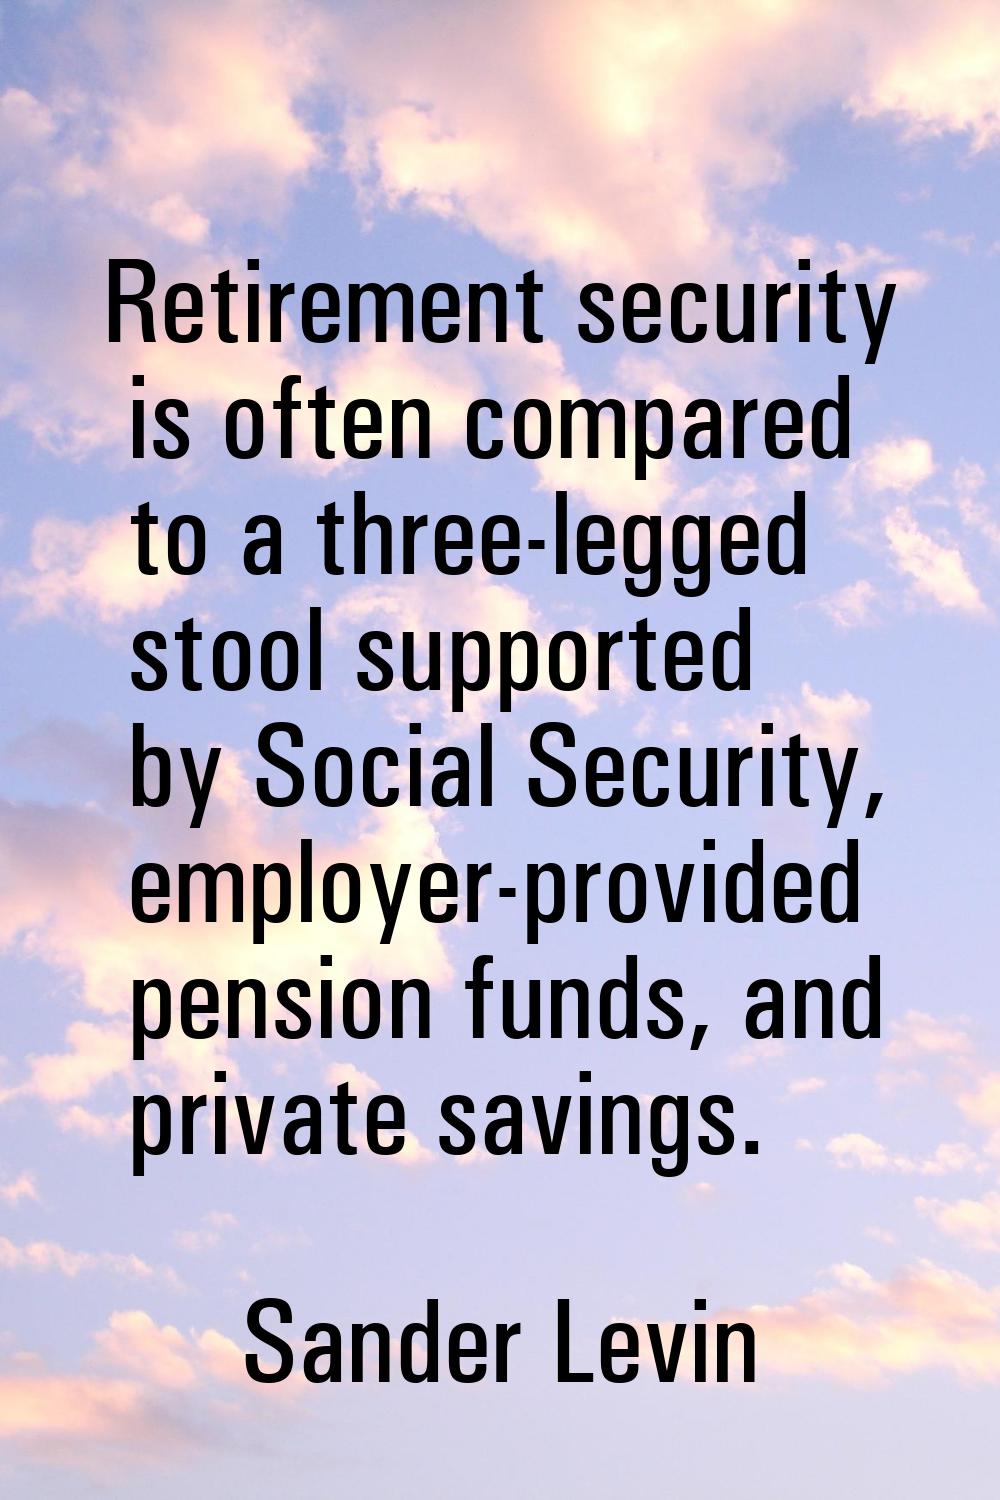 Retirement security is often compared to a three-legged stool supported by Social Security, employe